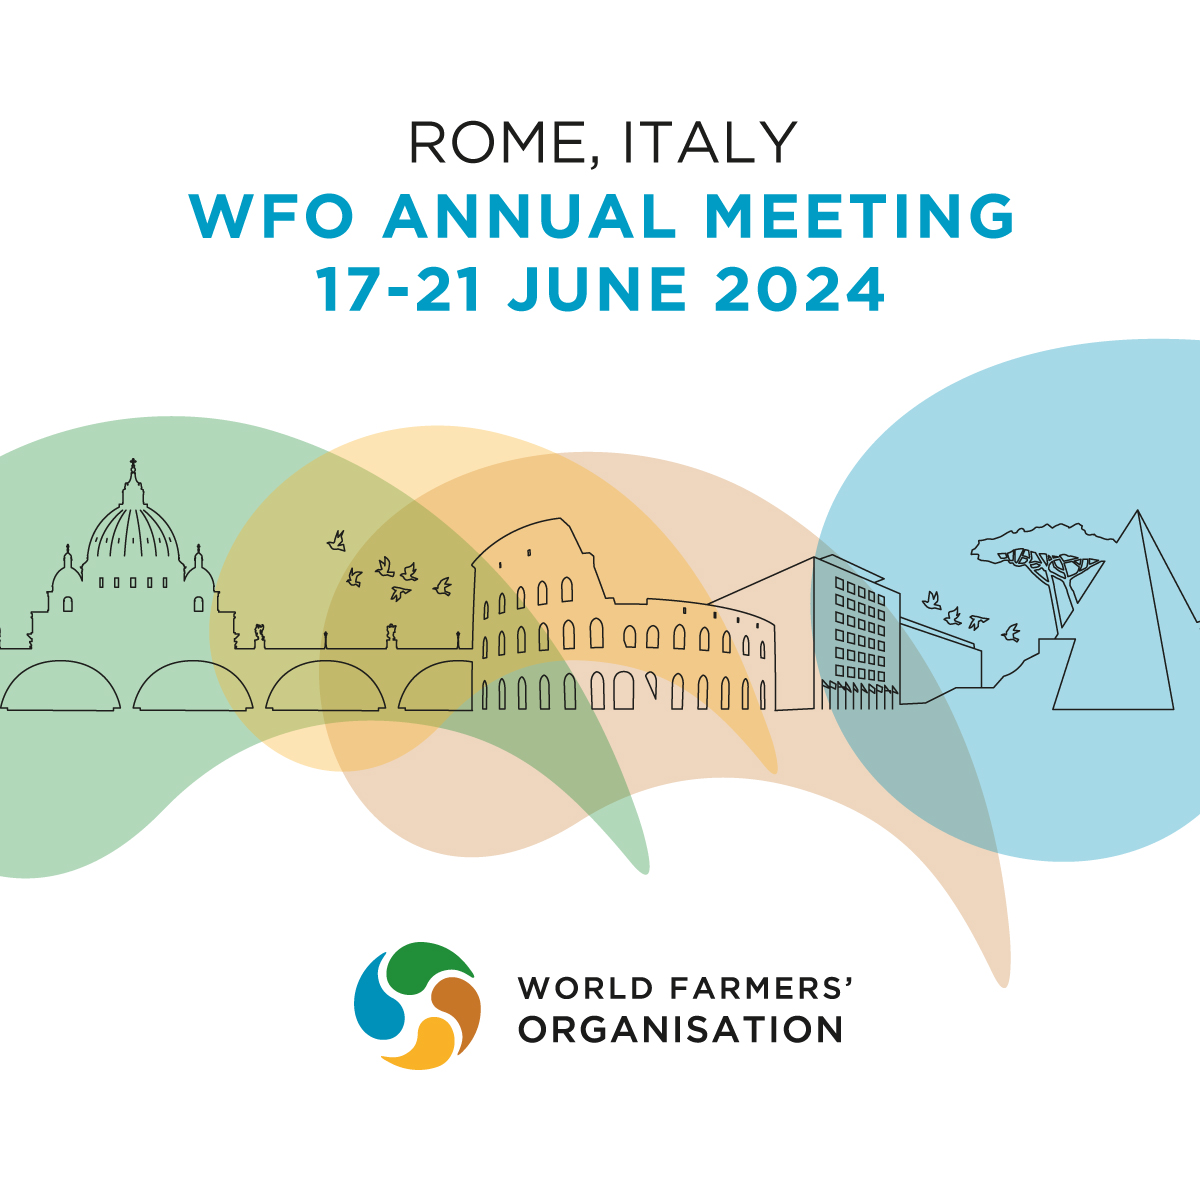 📅#WFO2024 Annual Meeting: 17-21 June, Rome 🇮🇹 Join the world #farmers 👩‍🌾👨‍🌾 at the @FAO HQ for networking opportunities, expert insights, local #farming experience, and forward-thinking conversations on the future of #agriculture. 🔜 Stay Tuned - Registration is opening soon!